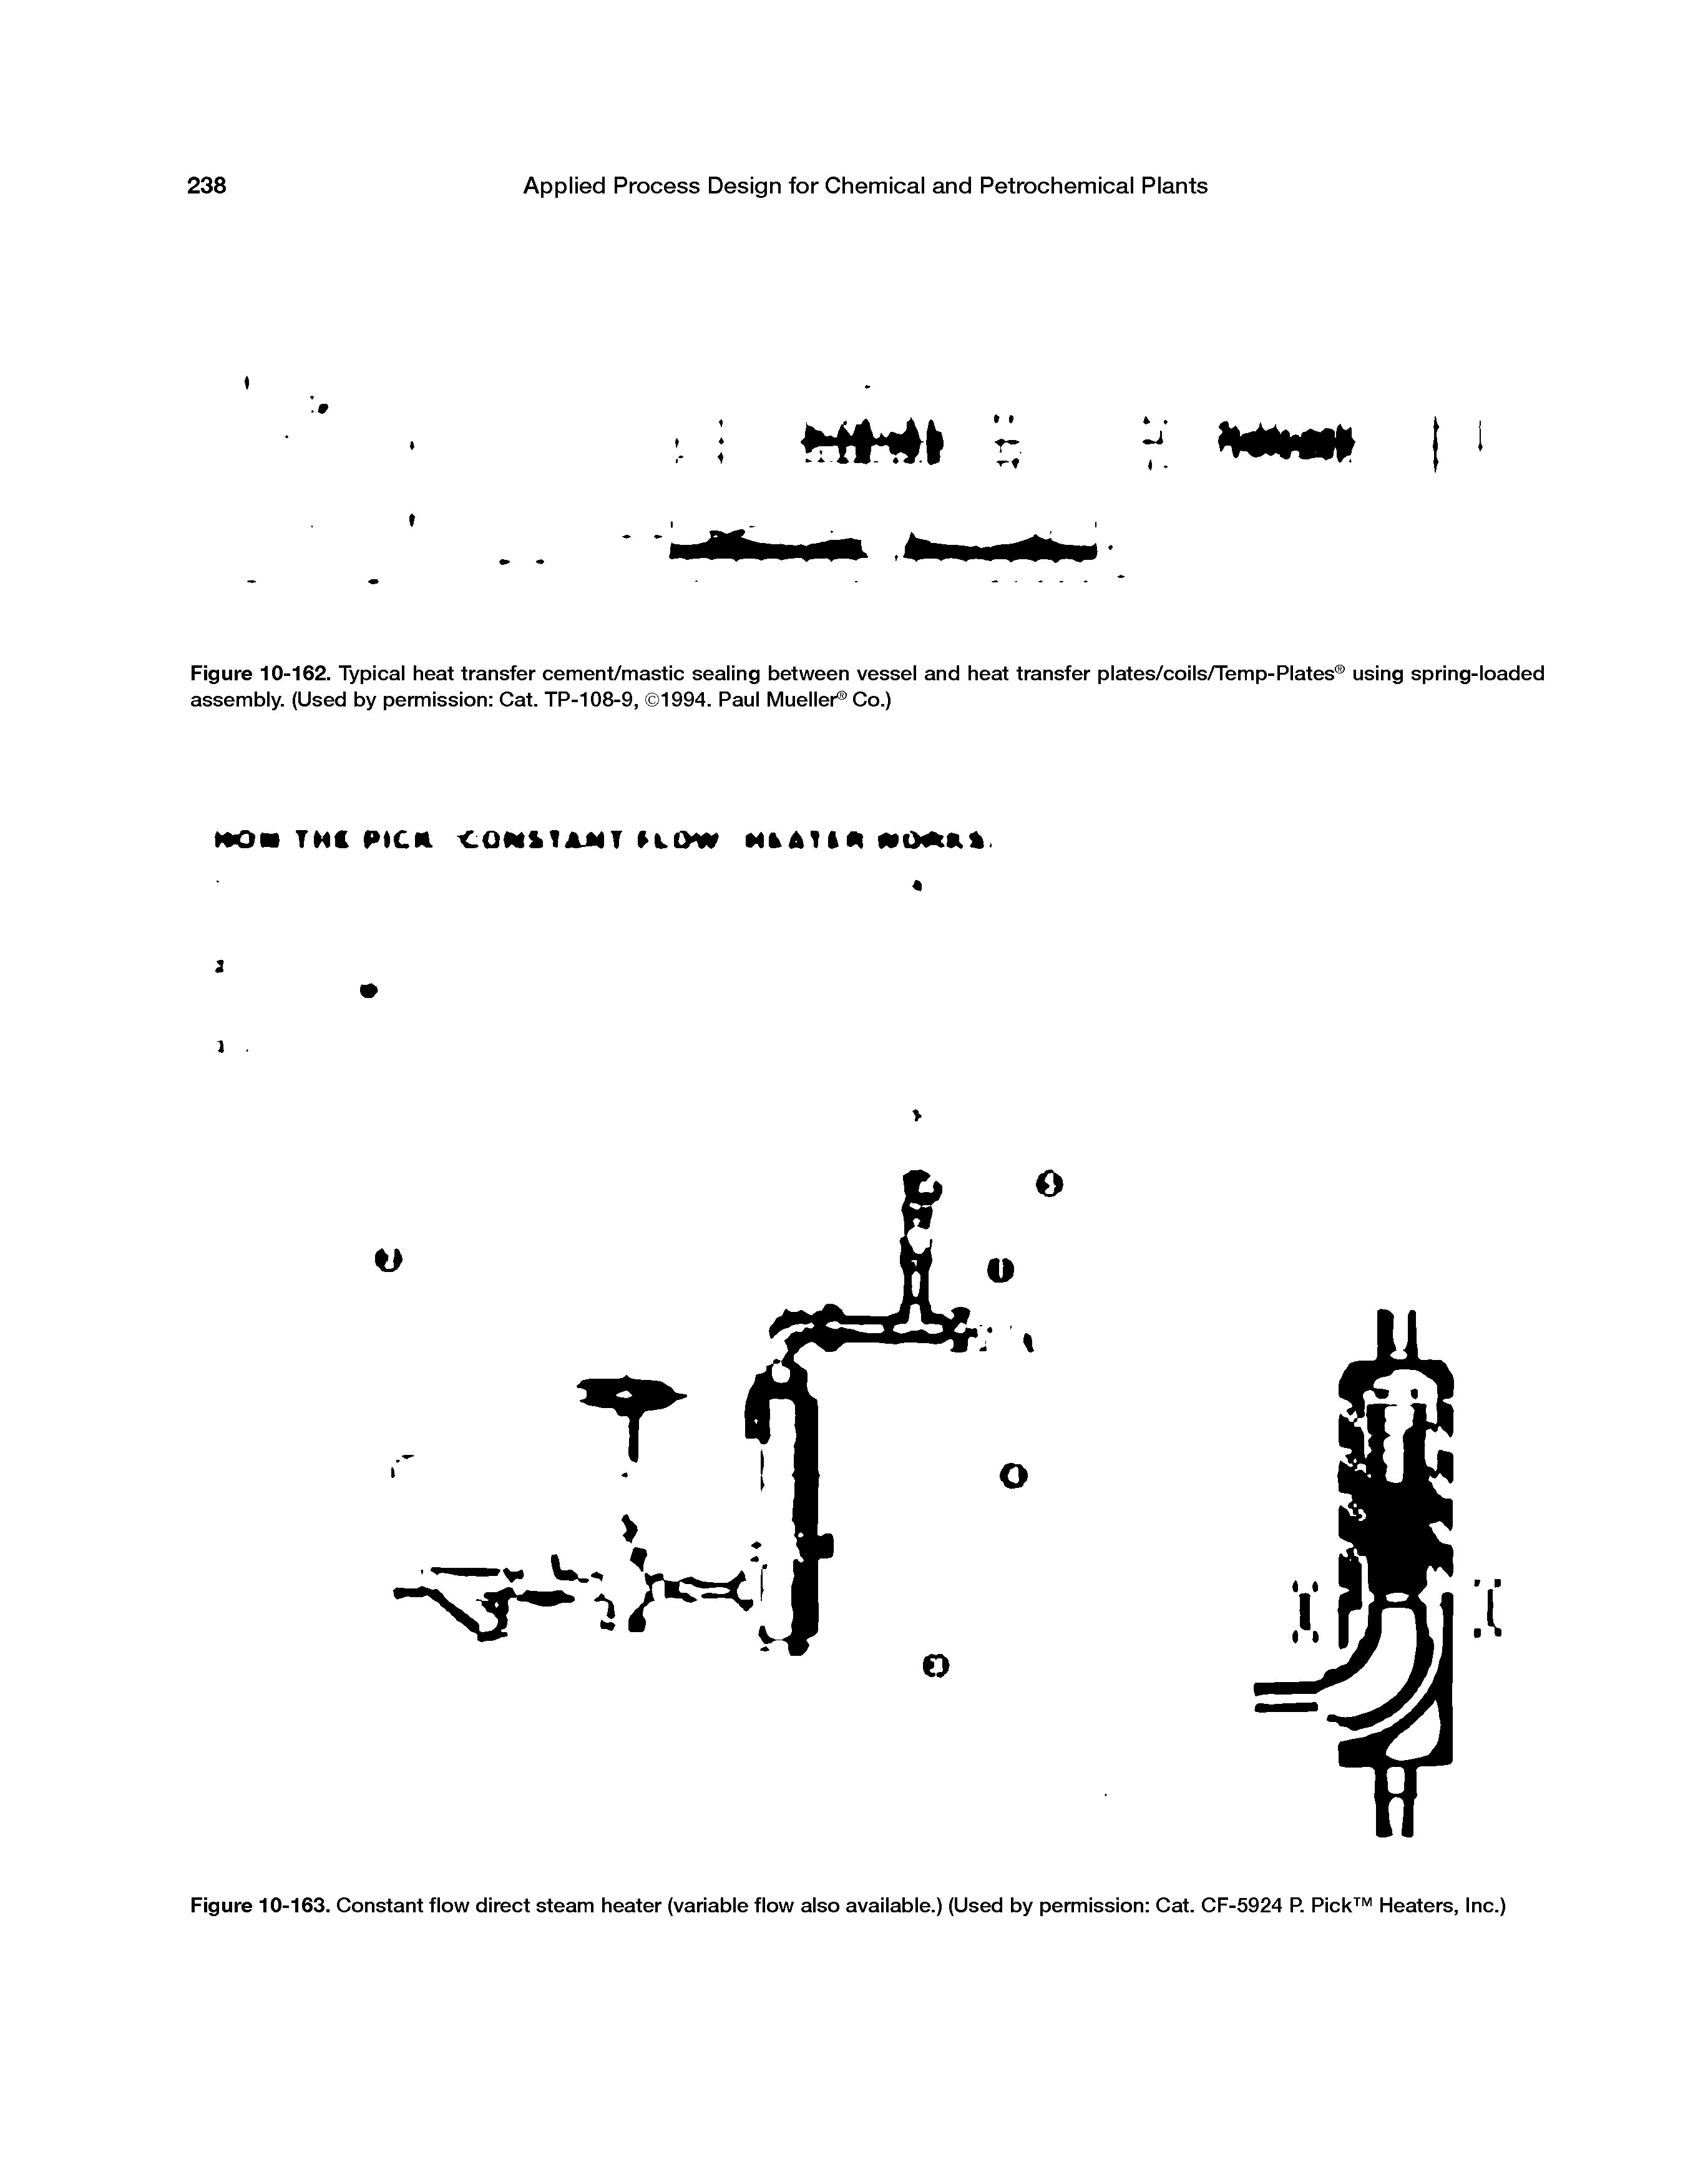 Figure 10-162. Typical heat transfer cement/mastic sealing between vessel and heat transfer plates/coils/Temp-Plates using spring-loaded assembly. (Used by permission Cat. TP-108-9, 1994. Paul Mueller Co.)...